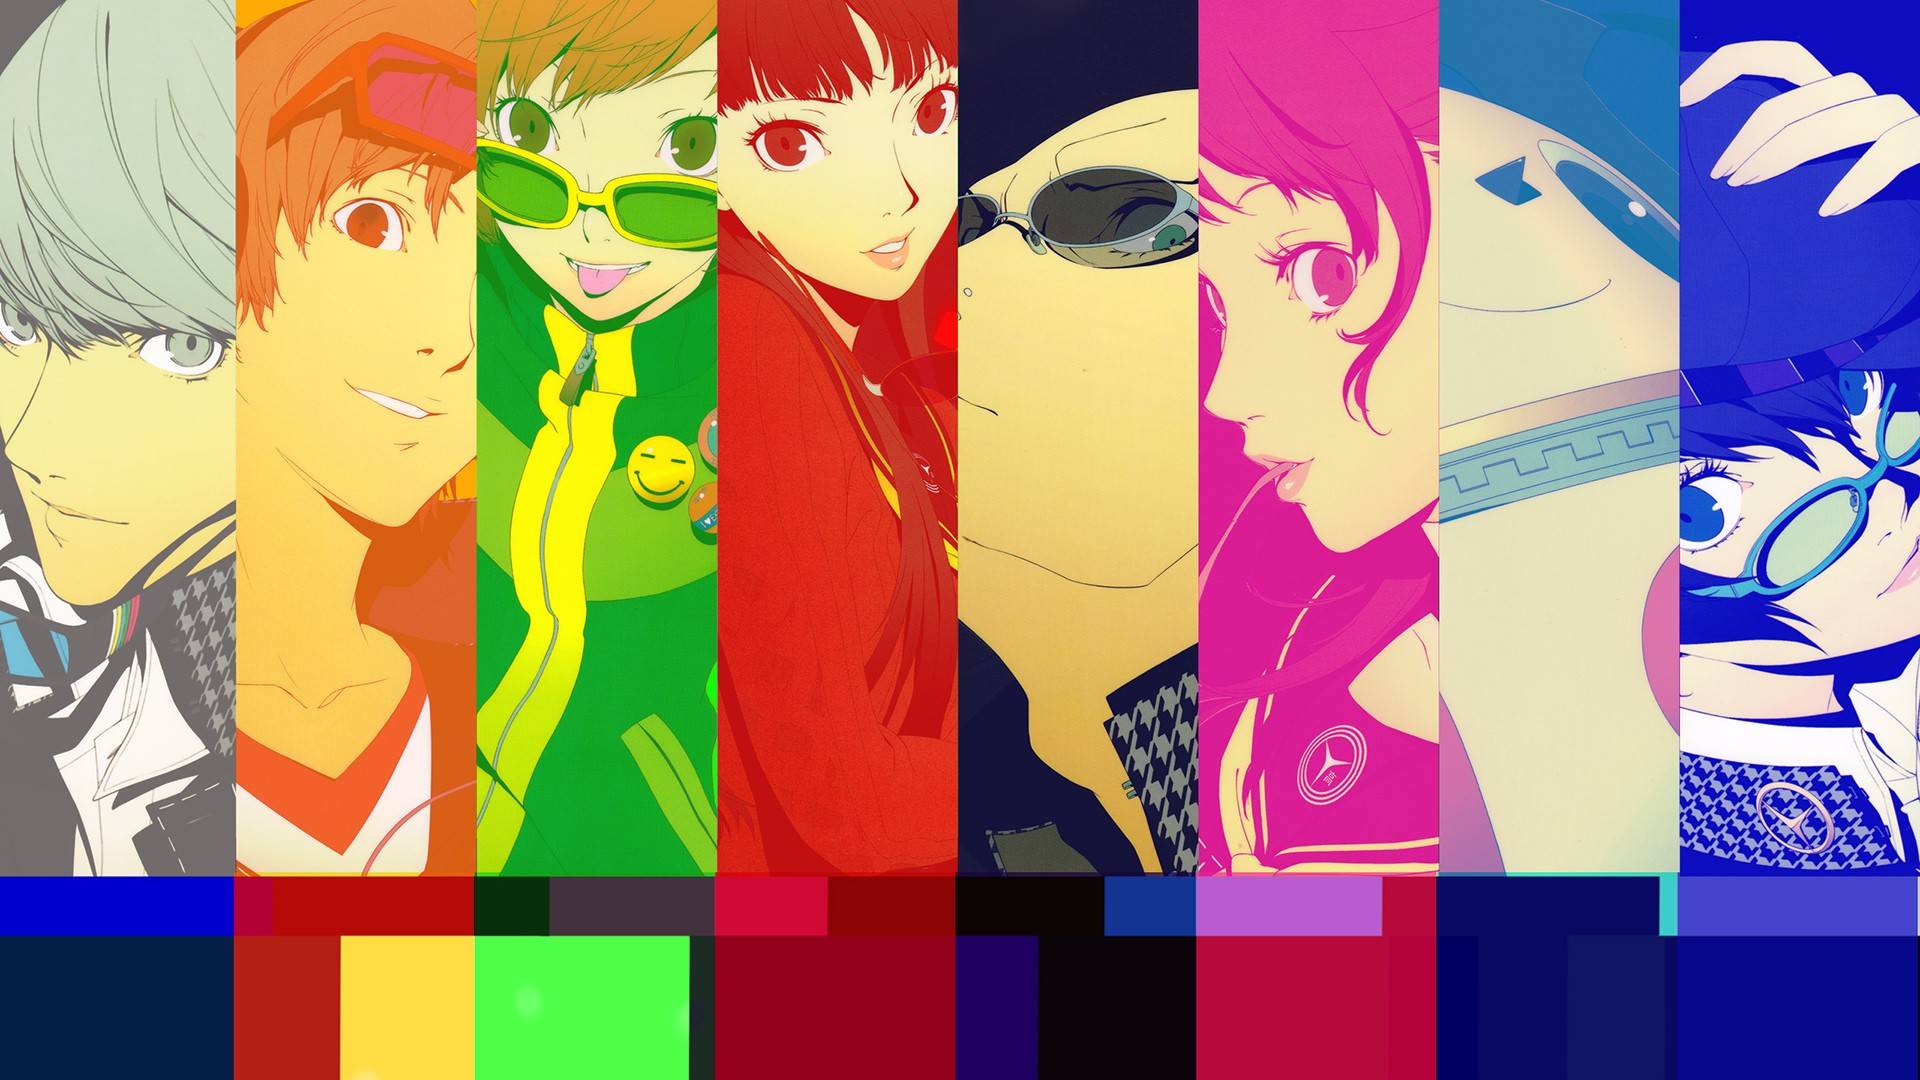 Free Download Colourful Persona 4 Wallpaper Persona Wallpaper 19x1080 For Your Desktop Mobile Tablet Explore 49 Persona 4 Wallpapers Persona 4 Hd Wallpaper Persona Q Wallpaper Persona 5 Hd Wallpaper